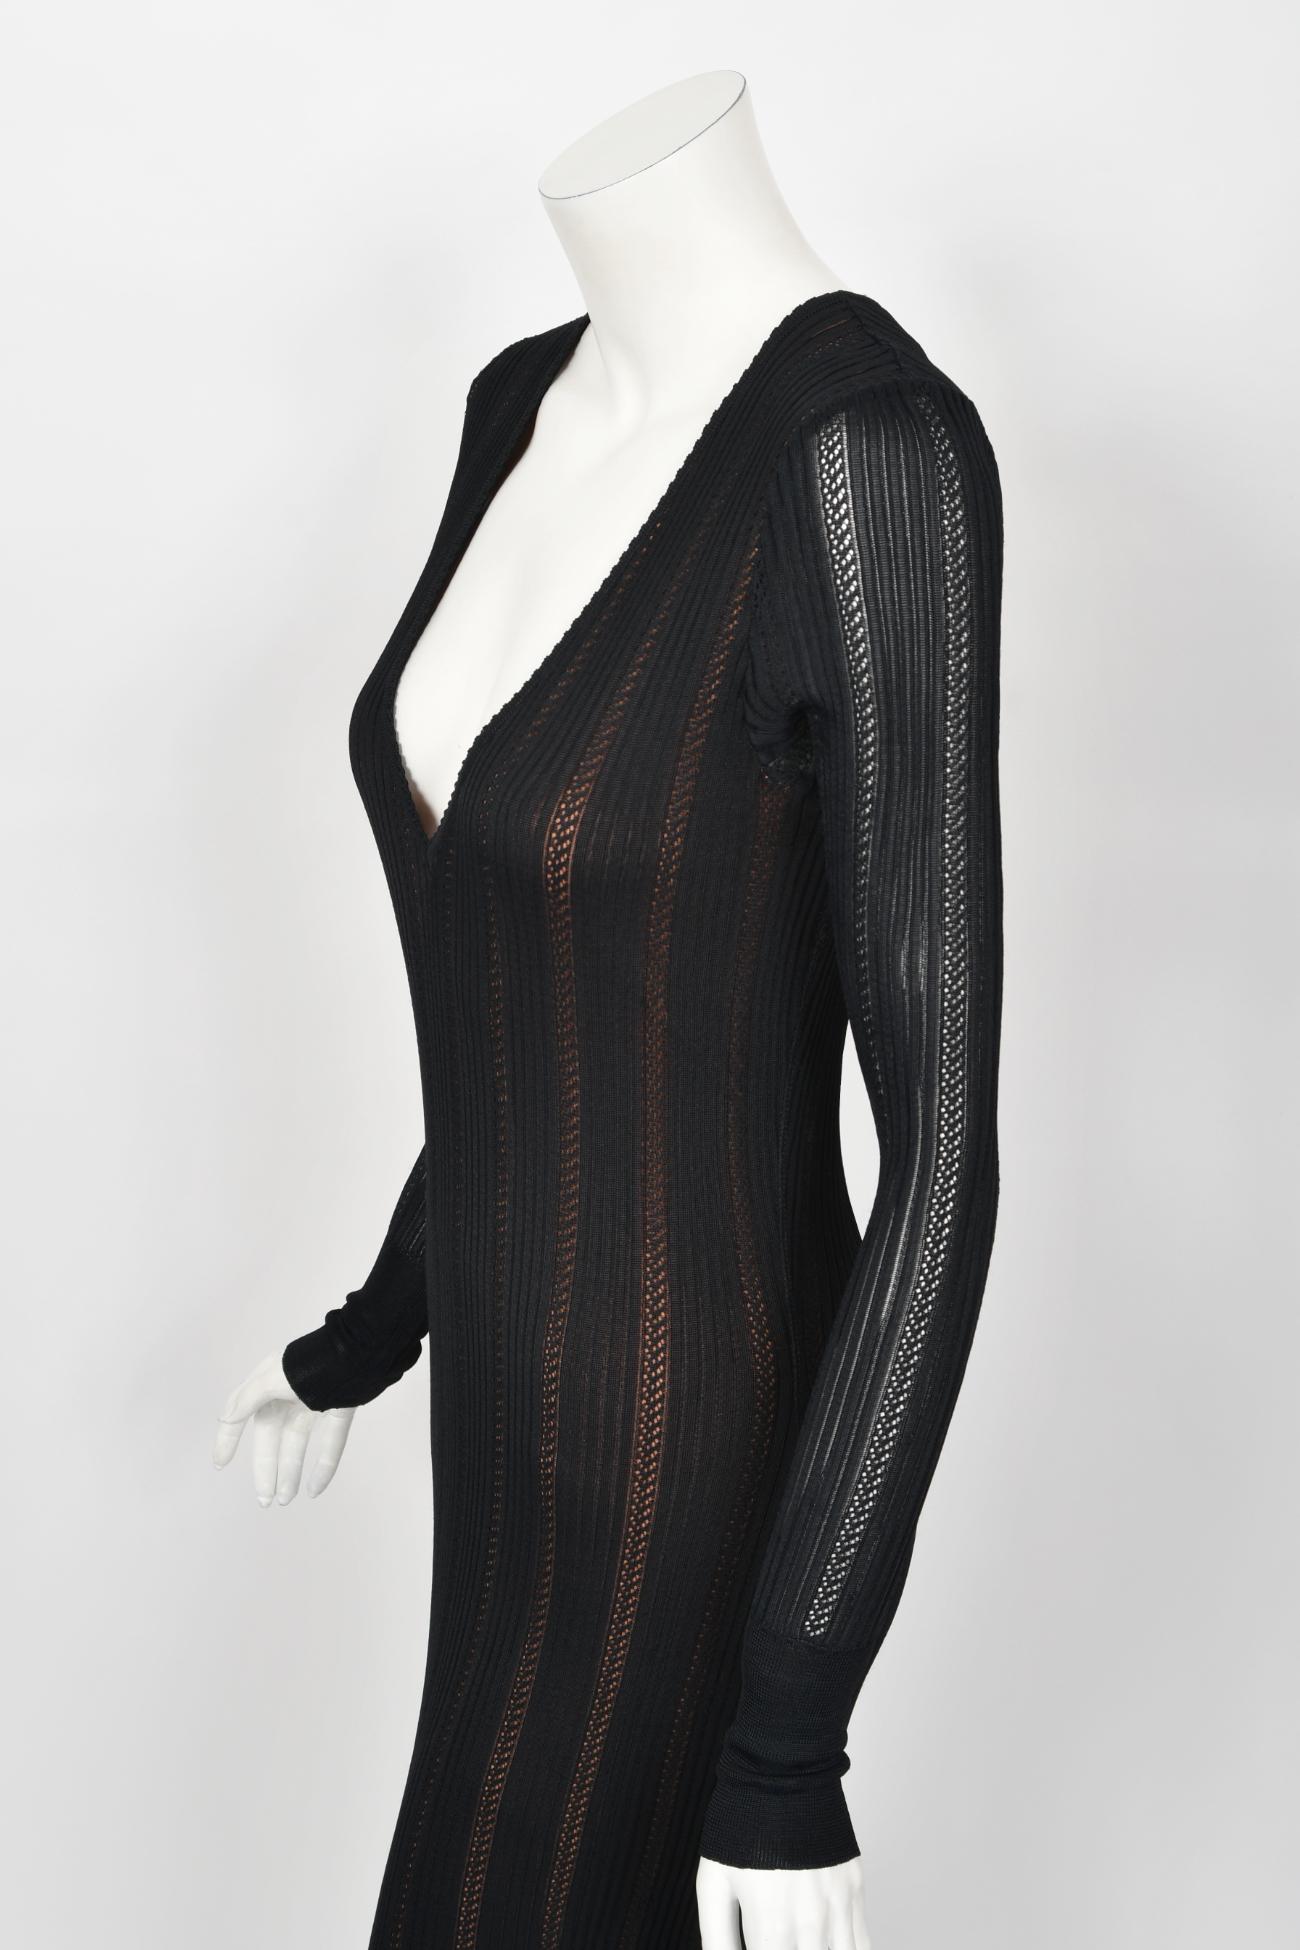 1996 Azzedine Alaia Documented Rare Nude Illusion Knit Bodycon Floor Length Gown For Sale 1